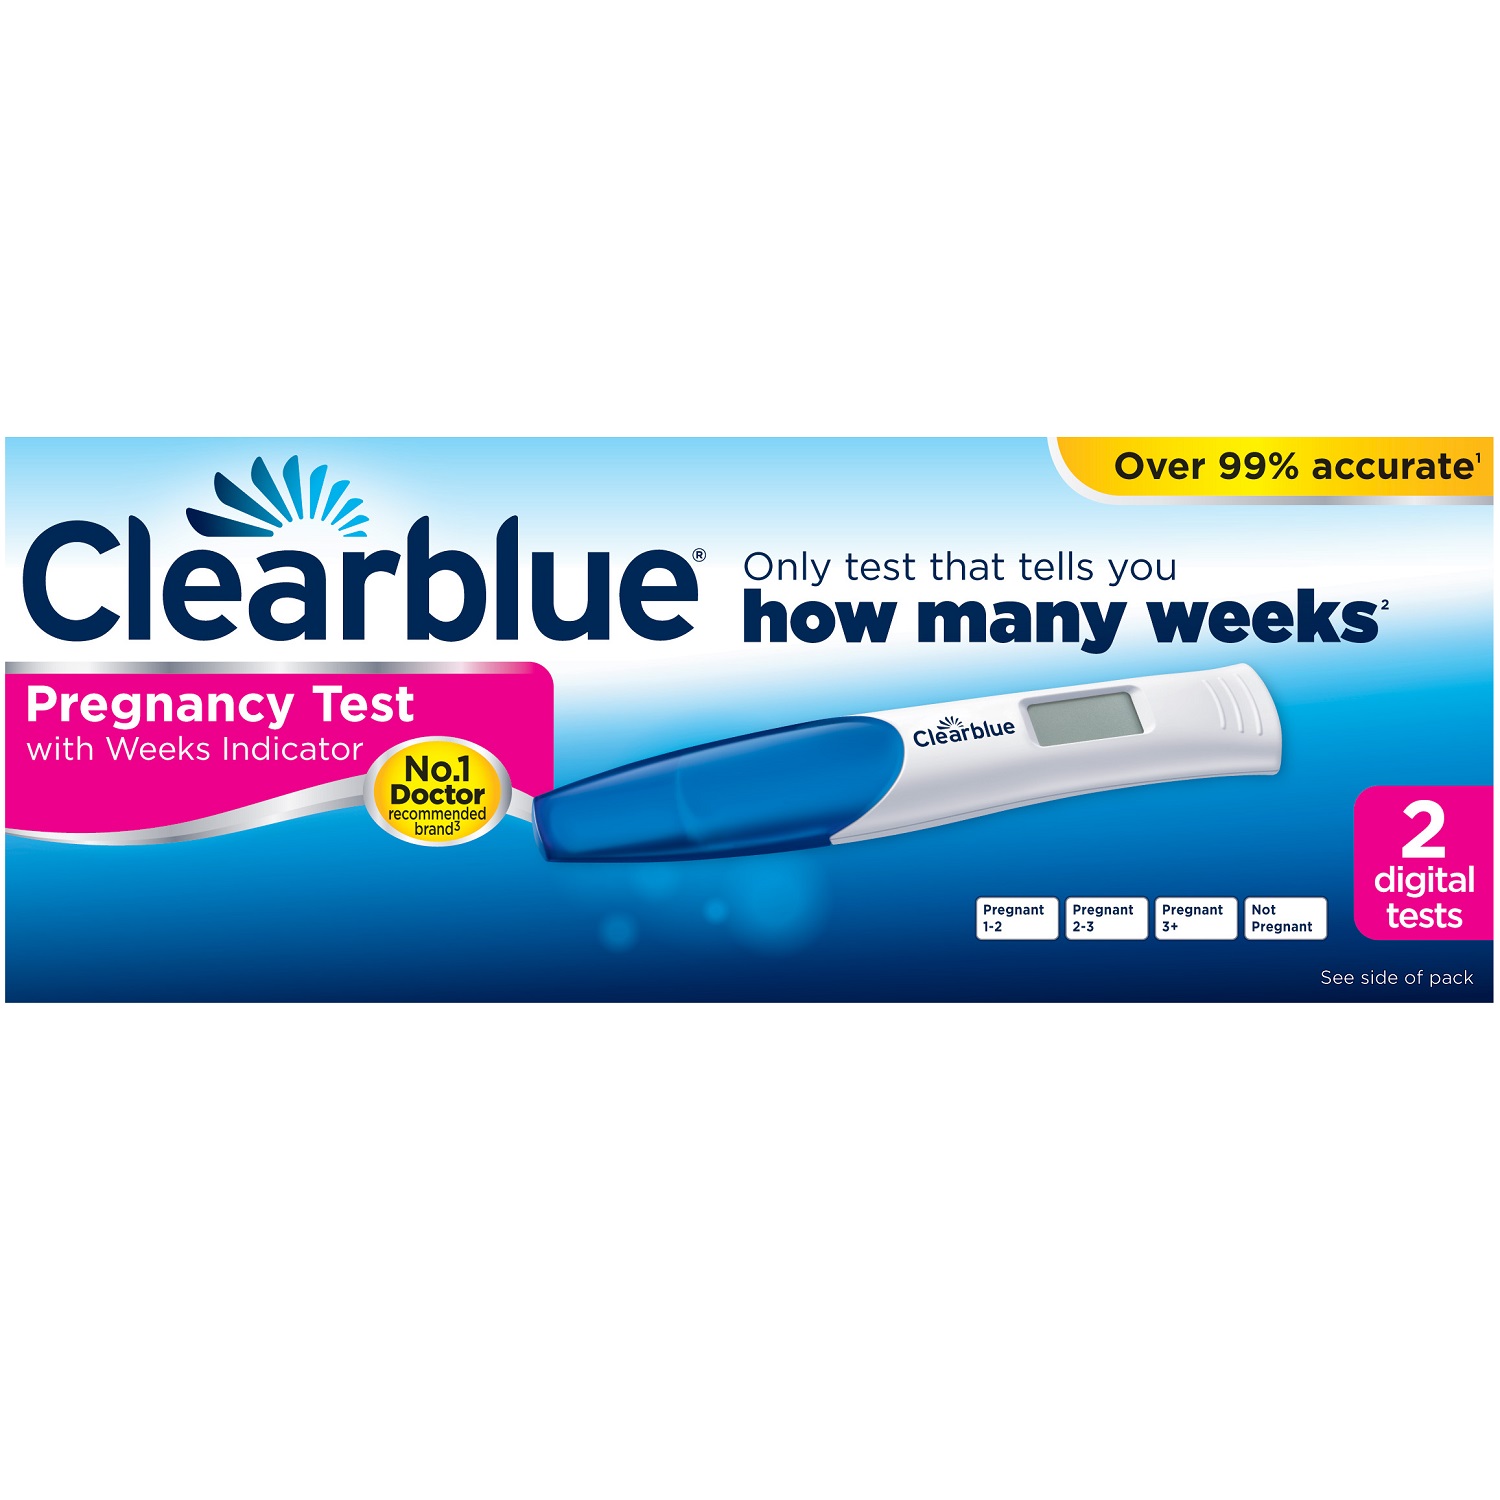 Clearblue Pregnancy Test Digital Weeks Indicator Over 99% Accurate - 2